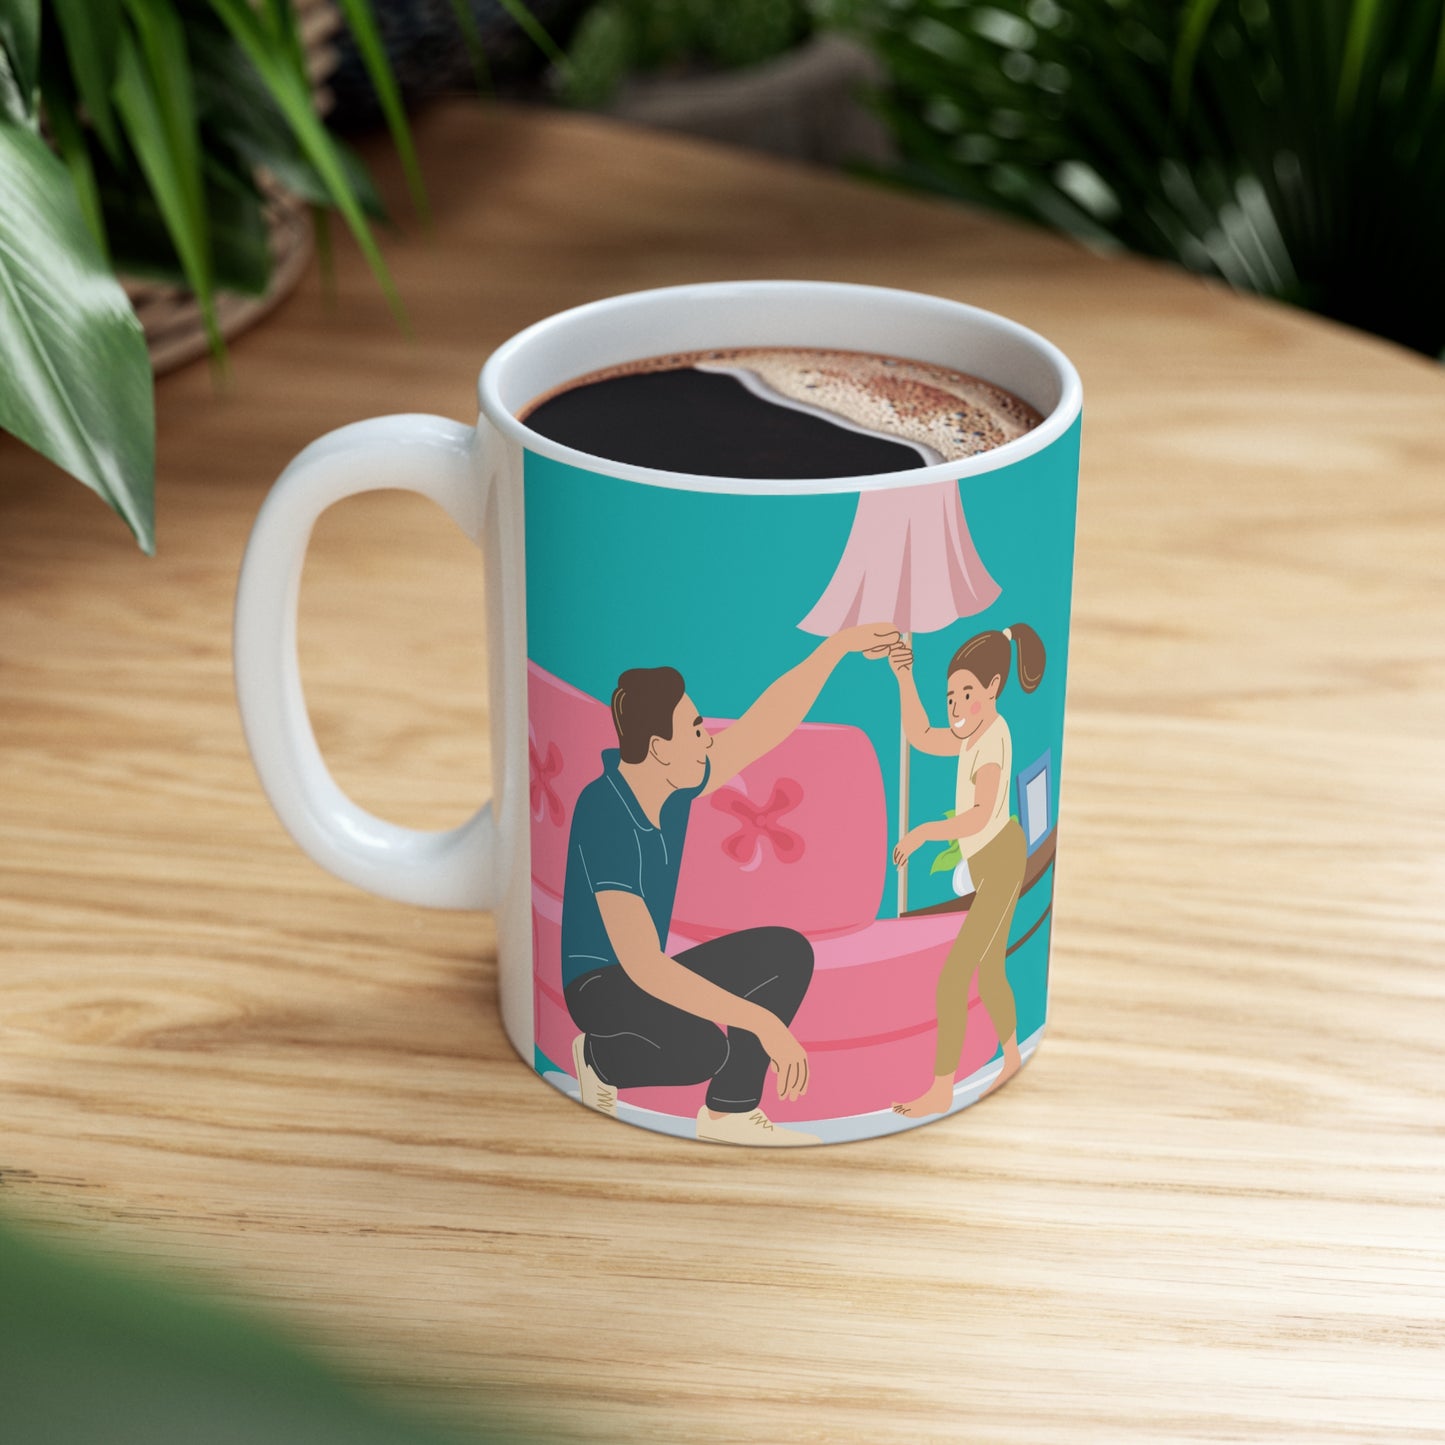 “BEST DAD EVER” on one side and dad dancing with his kid. Part of several mugs to choose from depending on what resonates with you.